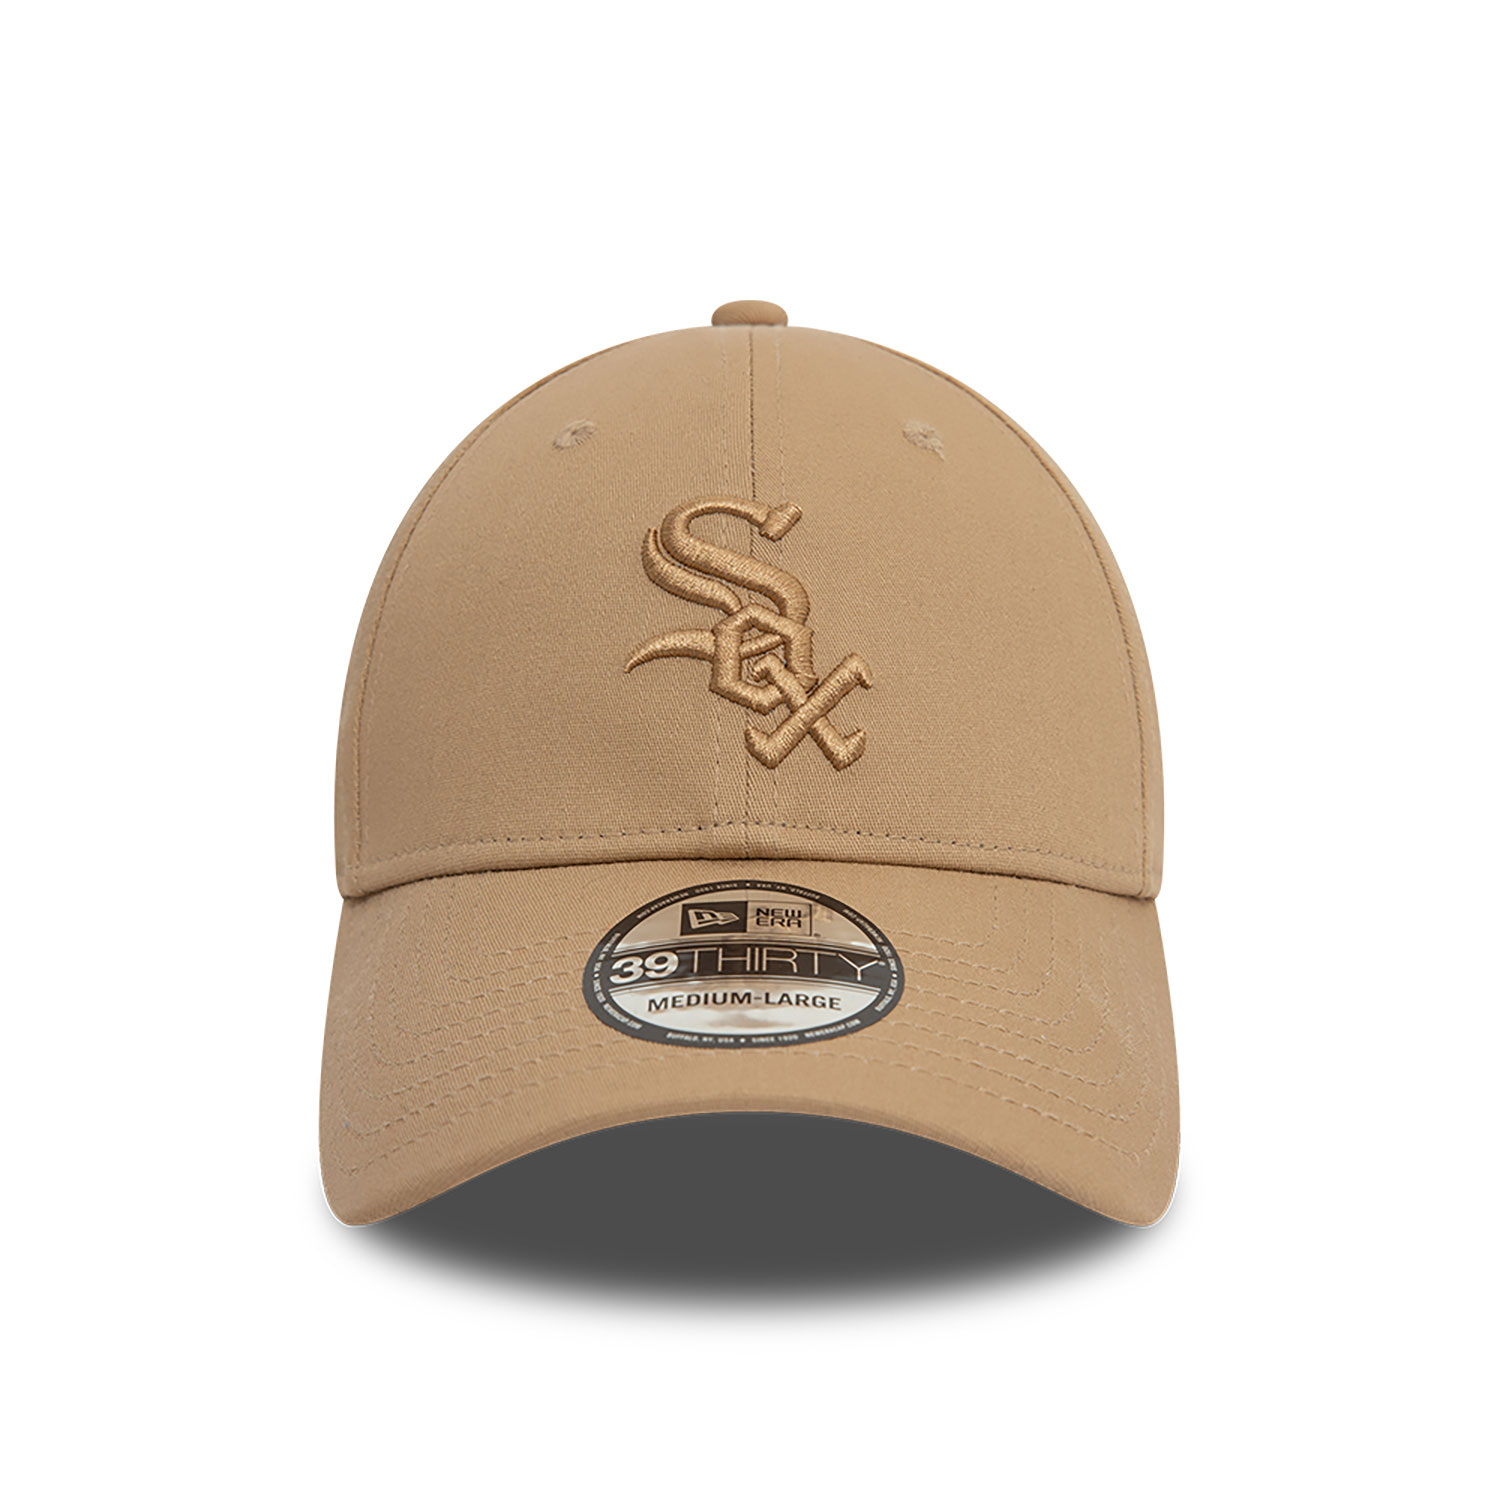 Chicago White Sox League Essential Beige 39THIRTY Stretch Fit Cap